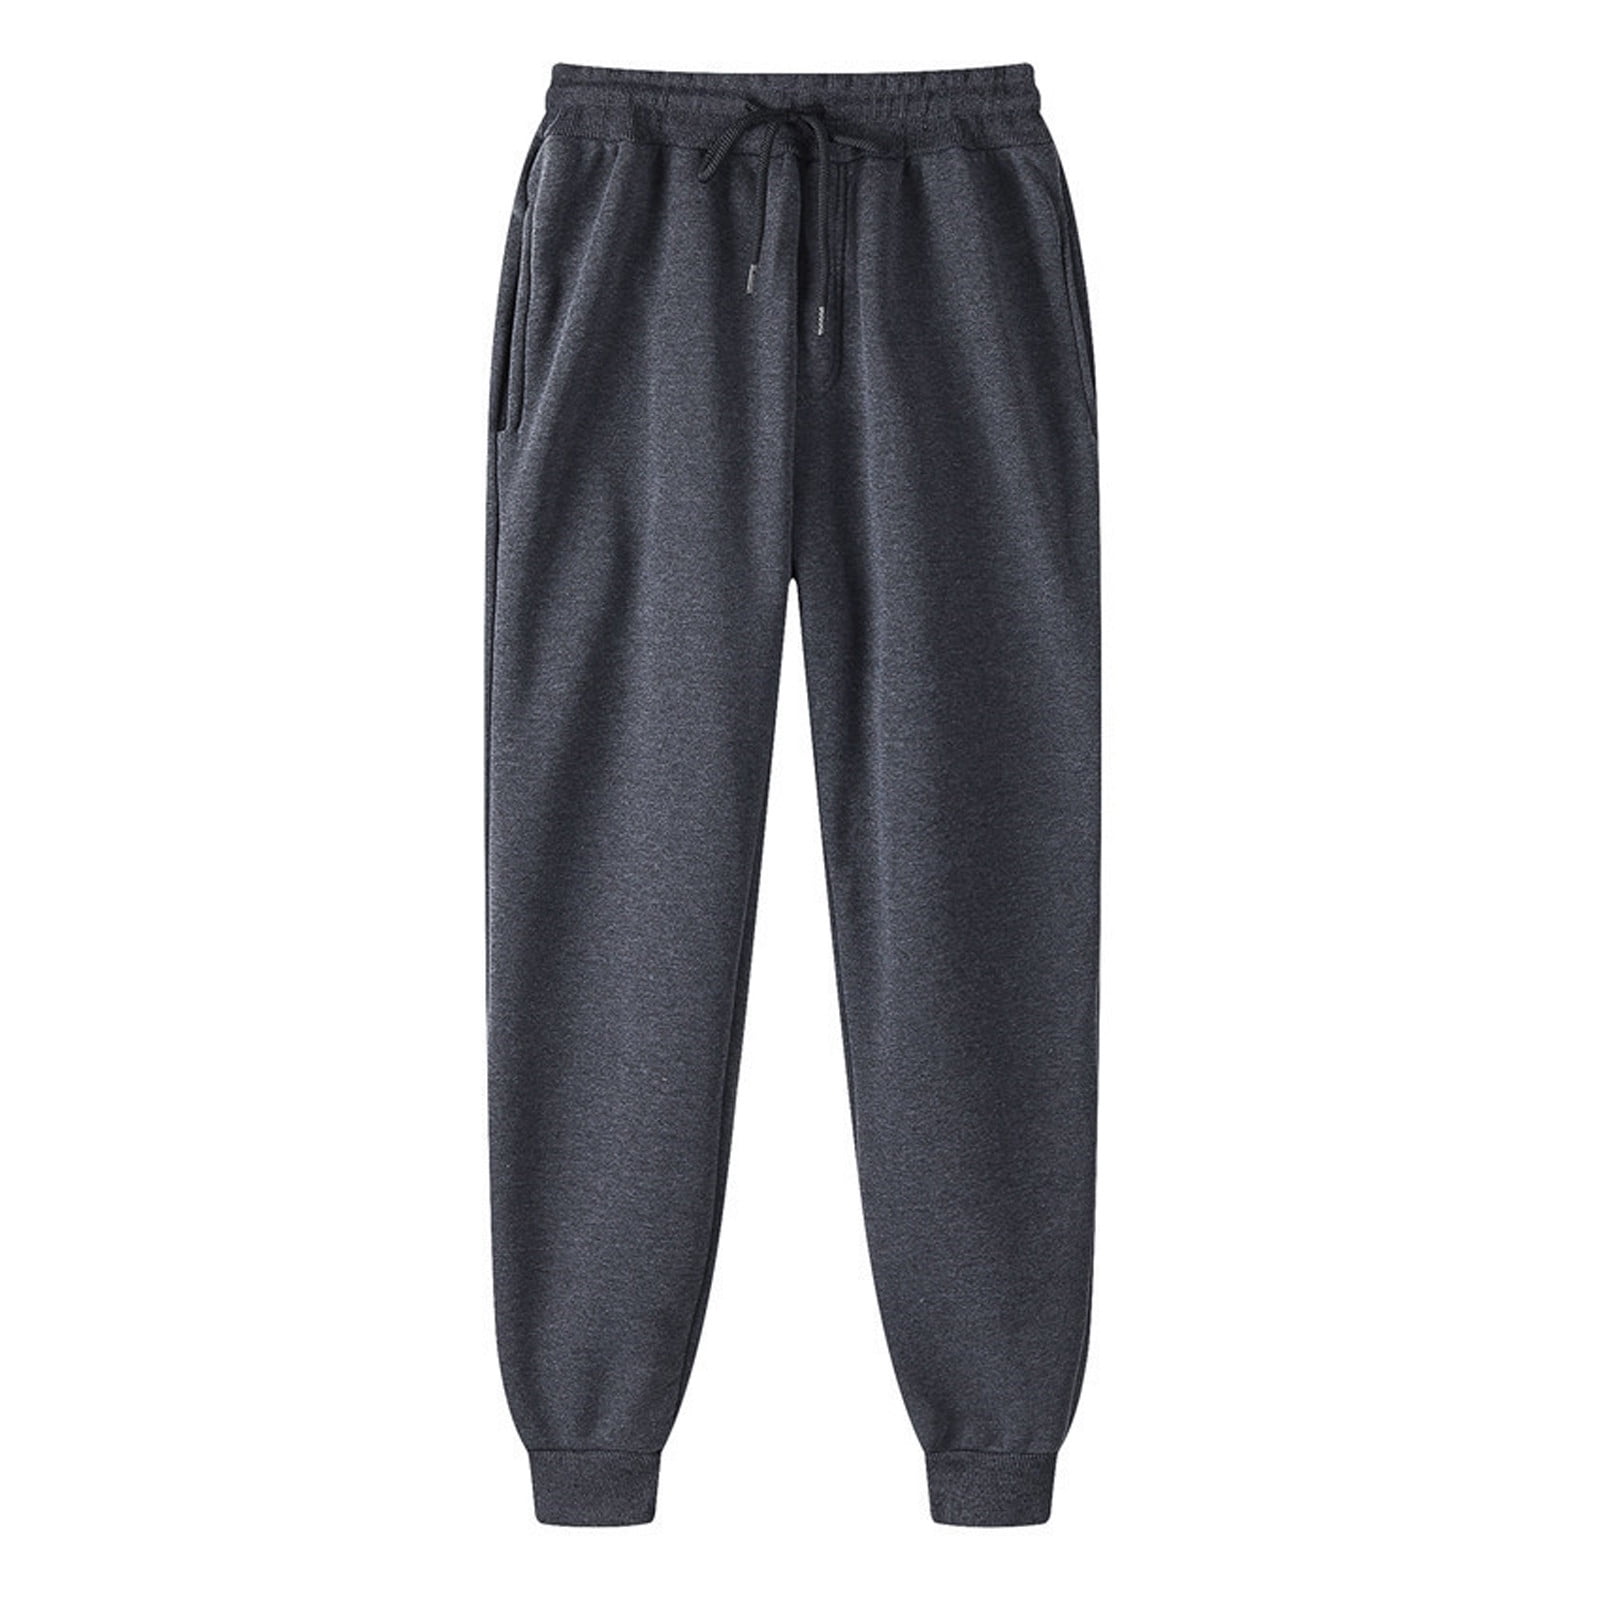 Casual French Cotton Terry Elastic Drawstring Sweatpants Workout